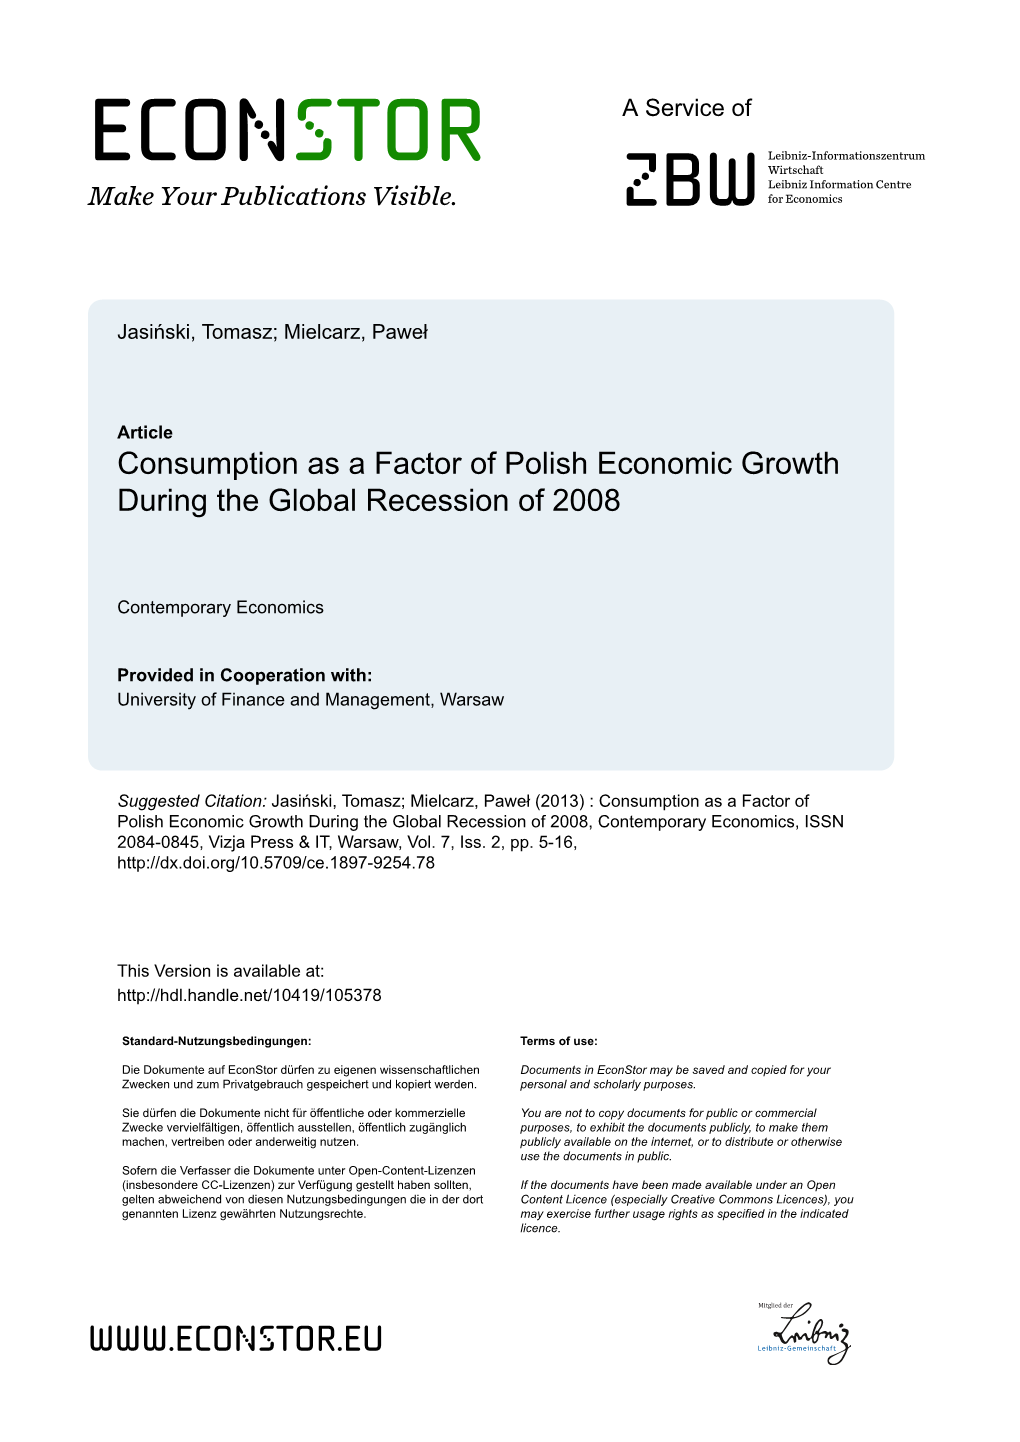 Consumption As a Factor of Polish Economic Growth During the Global Recession of 2008